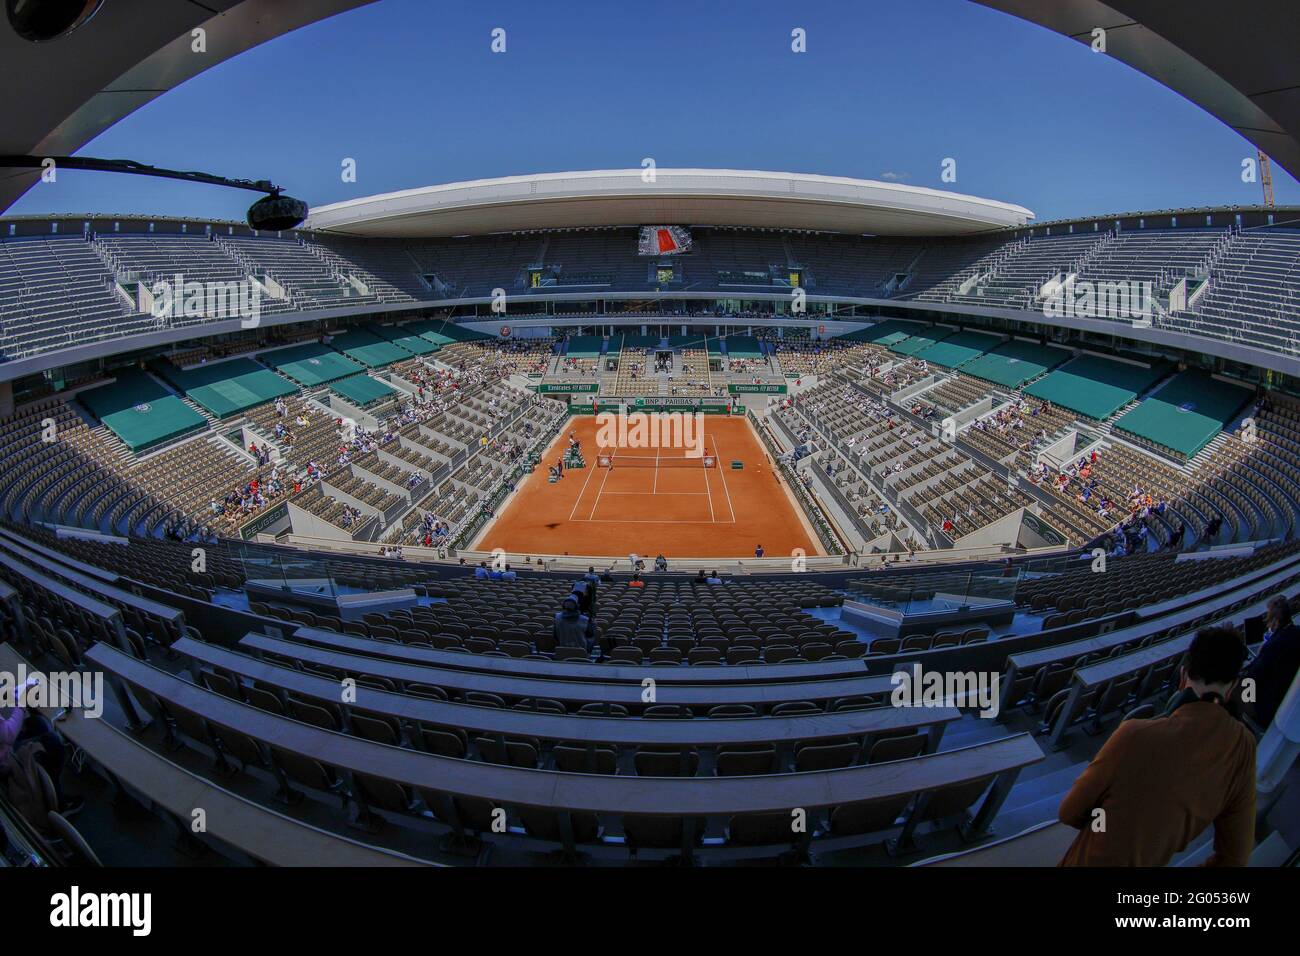 General view of the Philippe Chatrier centre court during Roland-Garros 2021, Grand Slam tennis tournament on May 30, 2021 at Roland-Garros stadium in Paris, France